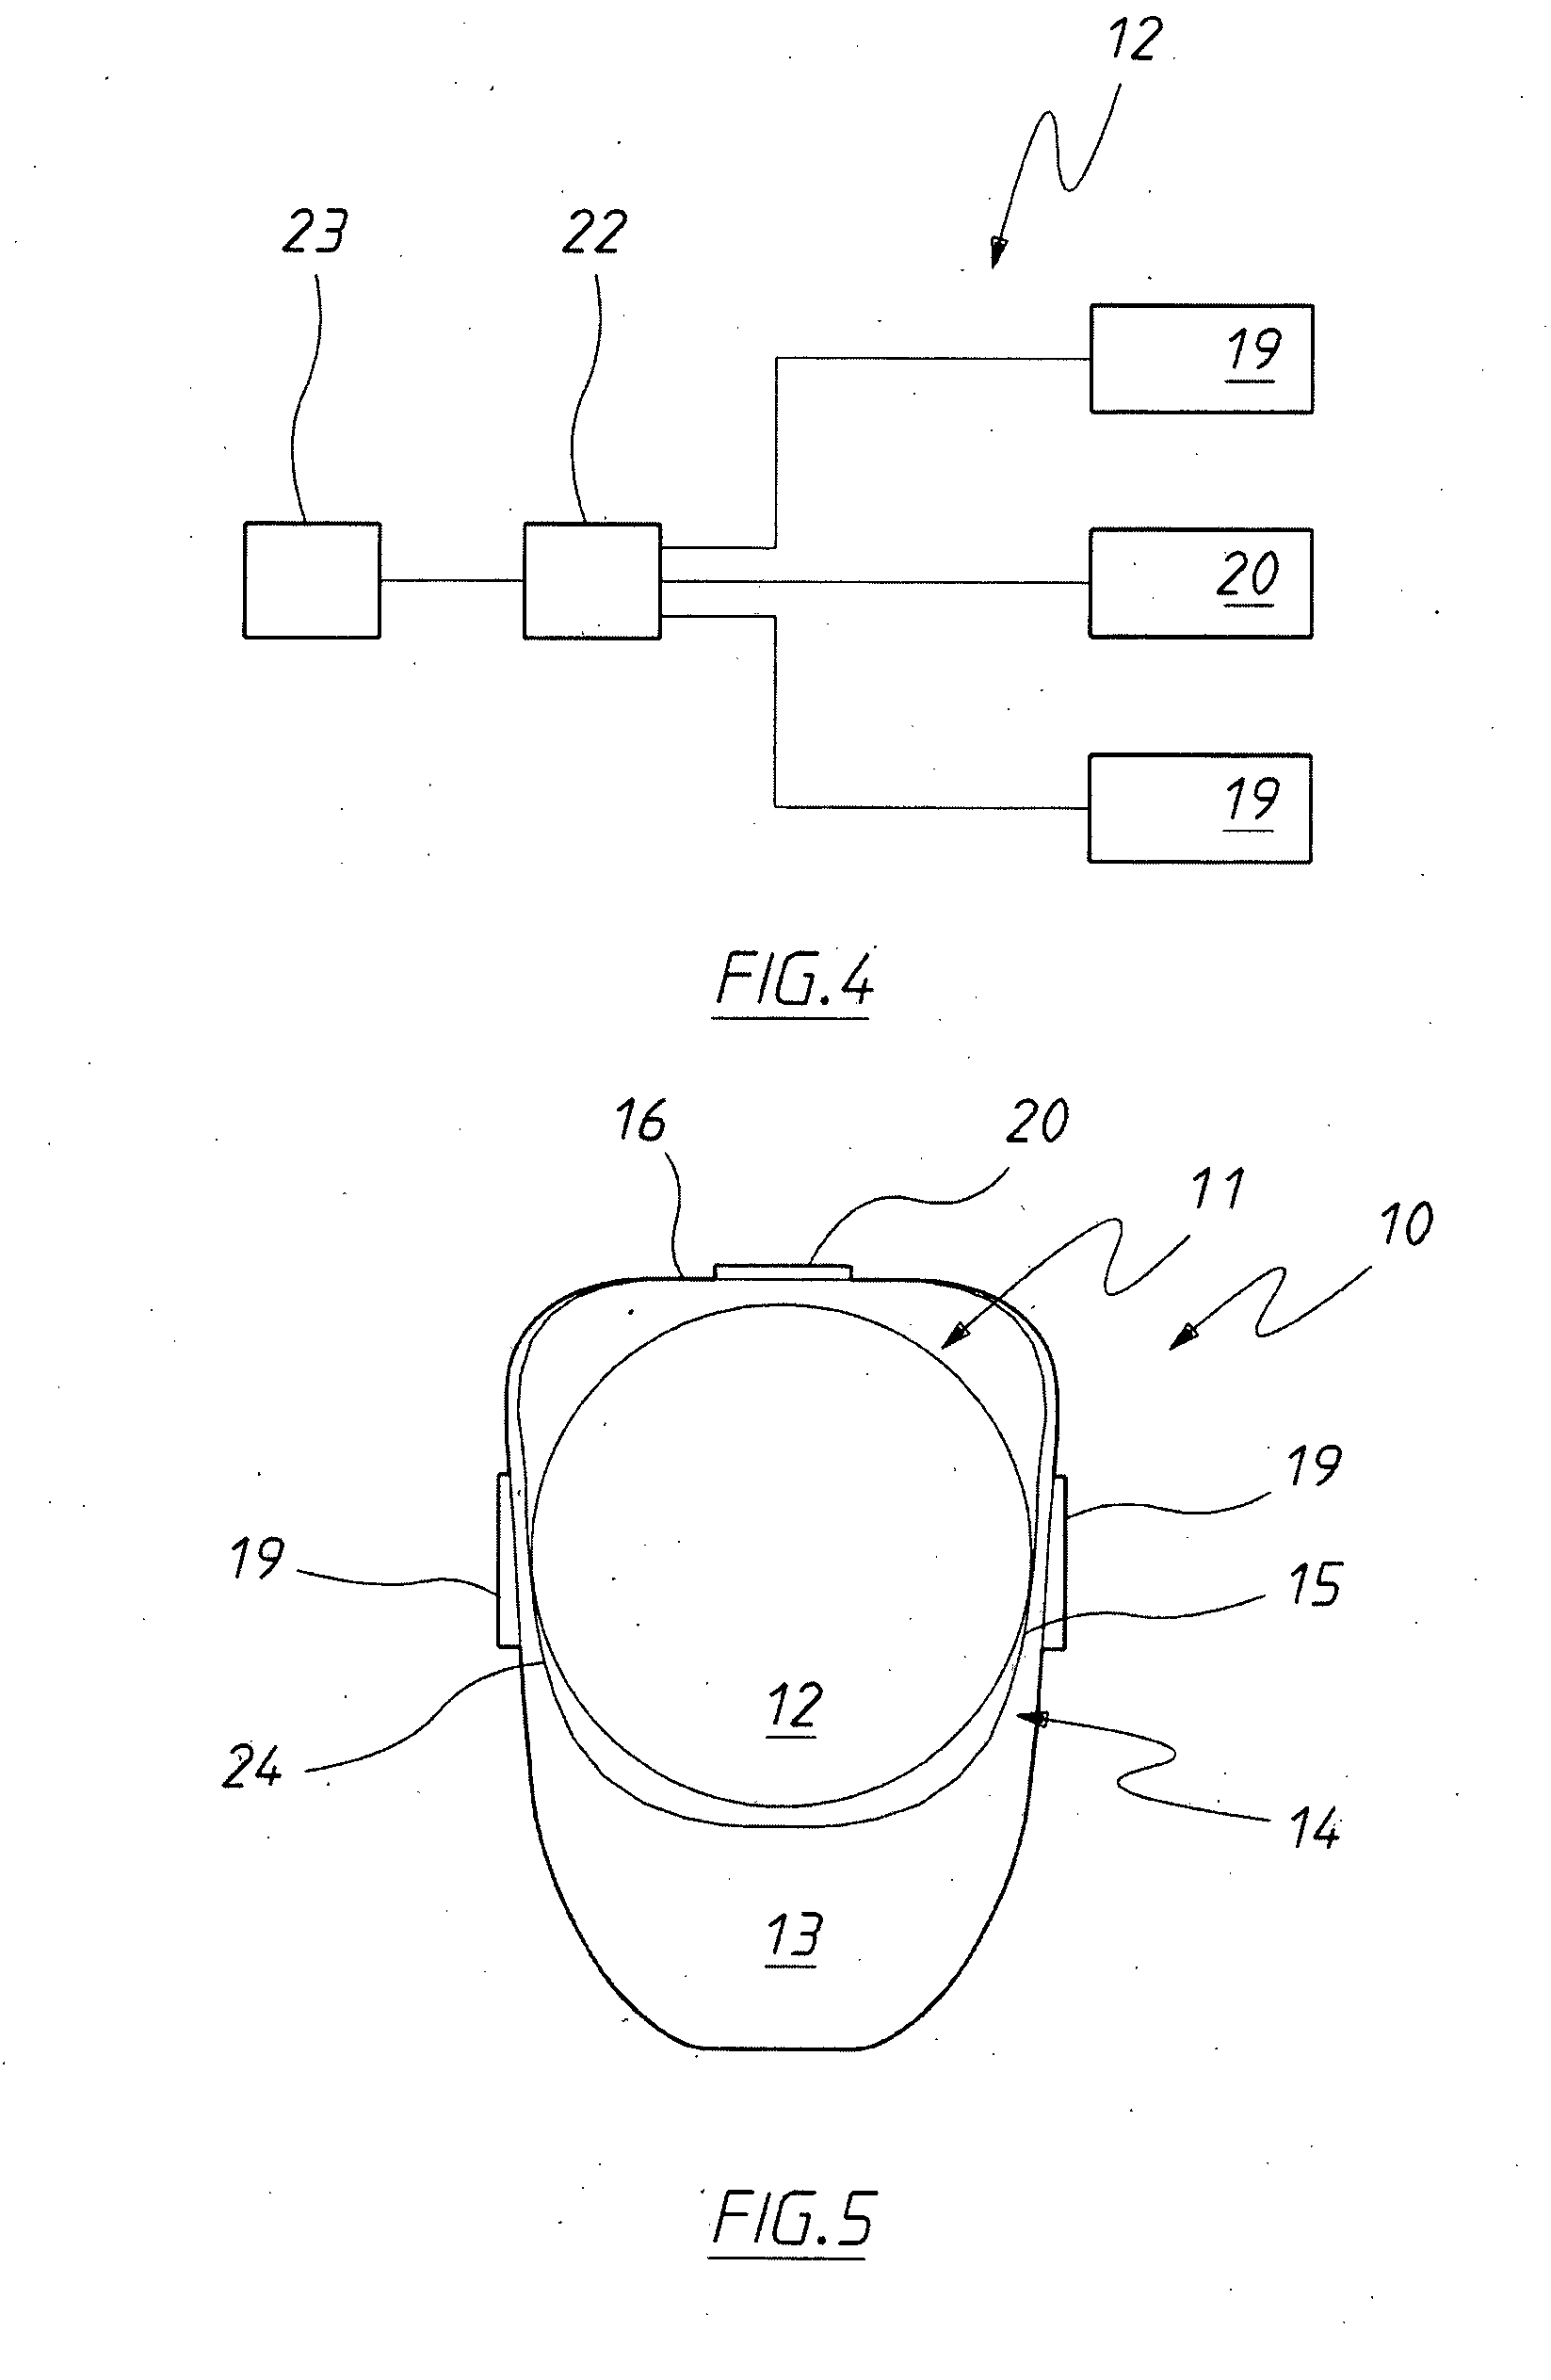 Intra vaginal device to aid in training and determining muscle strength